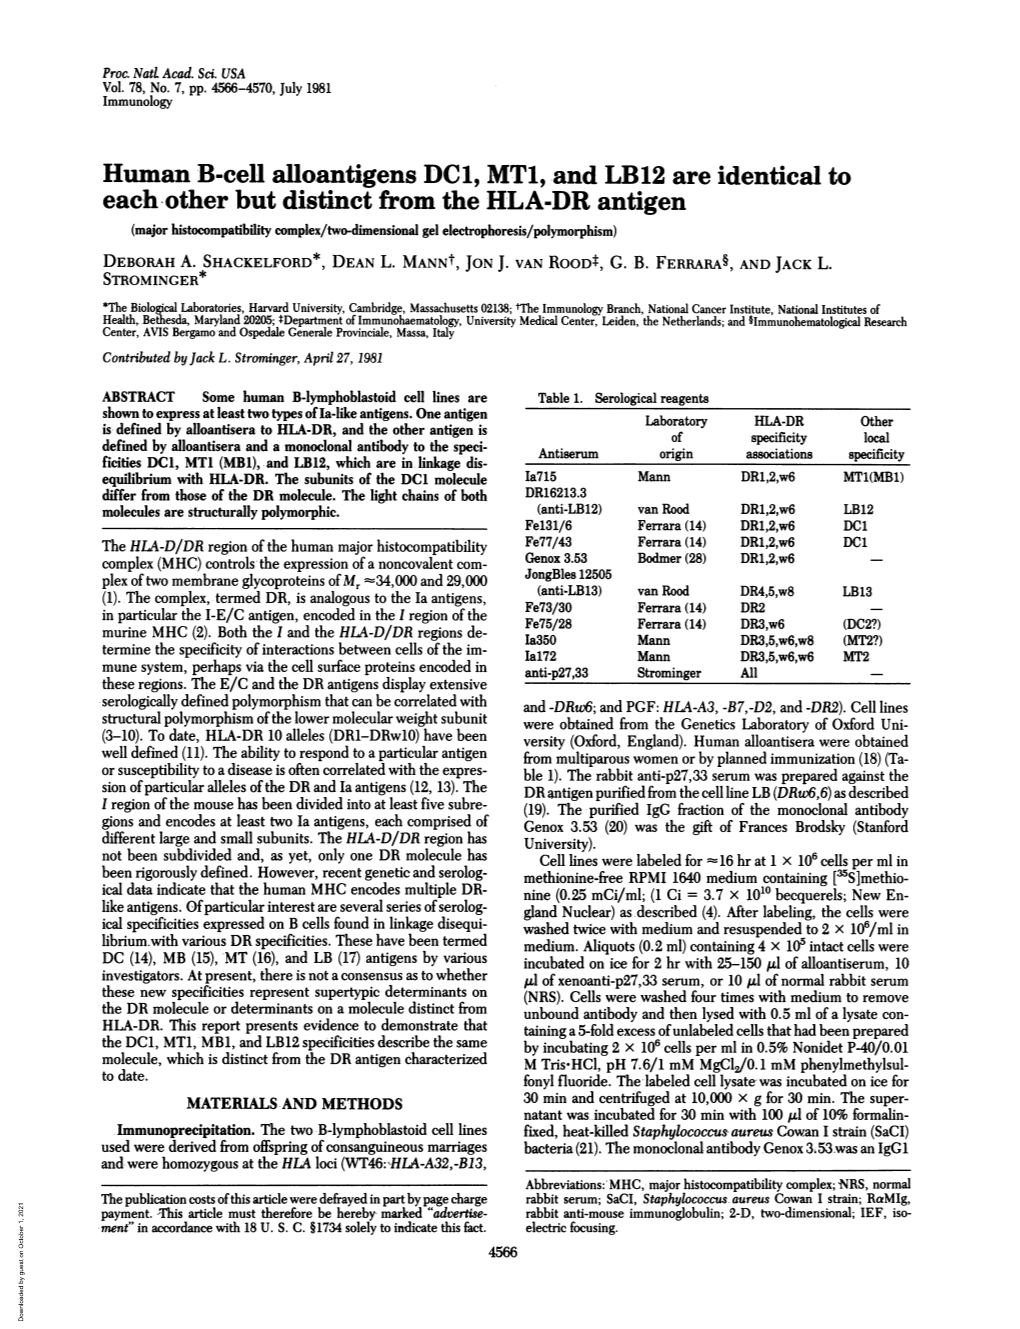 Human B-Cell Alloantigens DC1, MT1, and LB12 Are Identical to Each